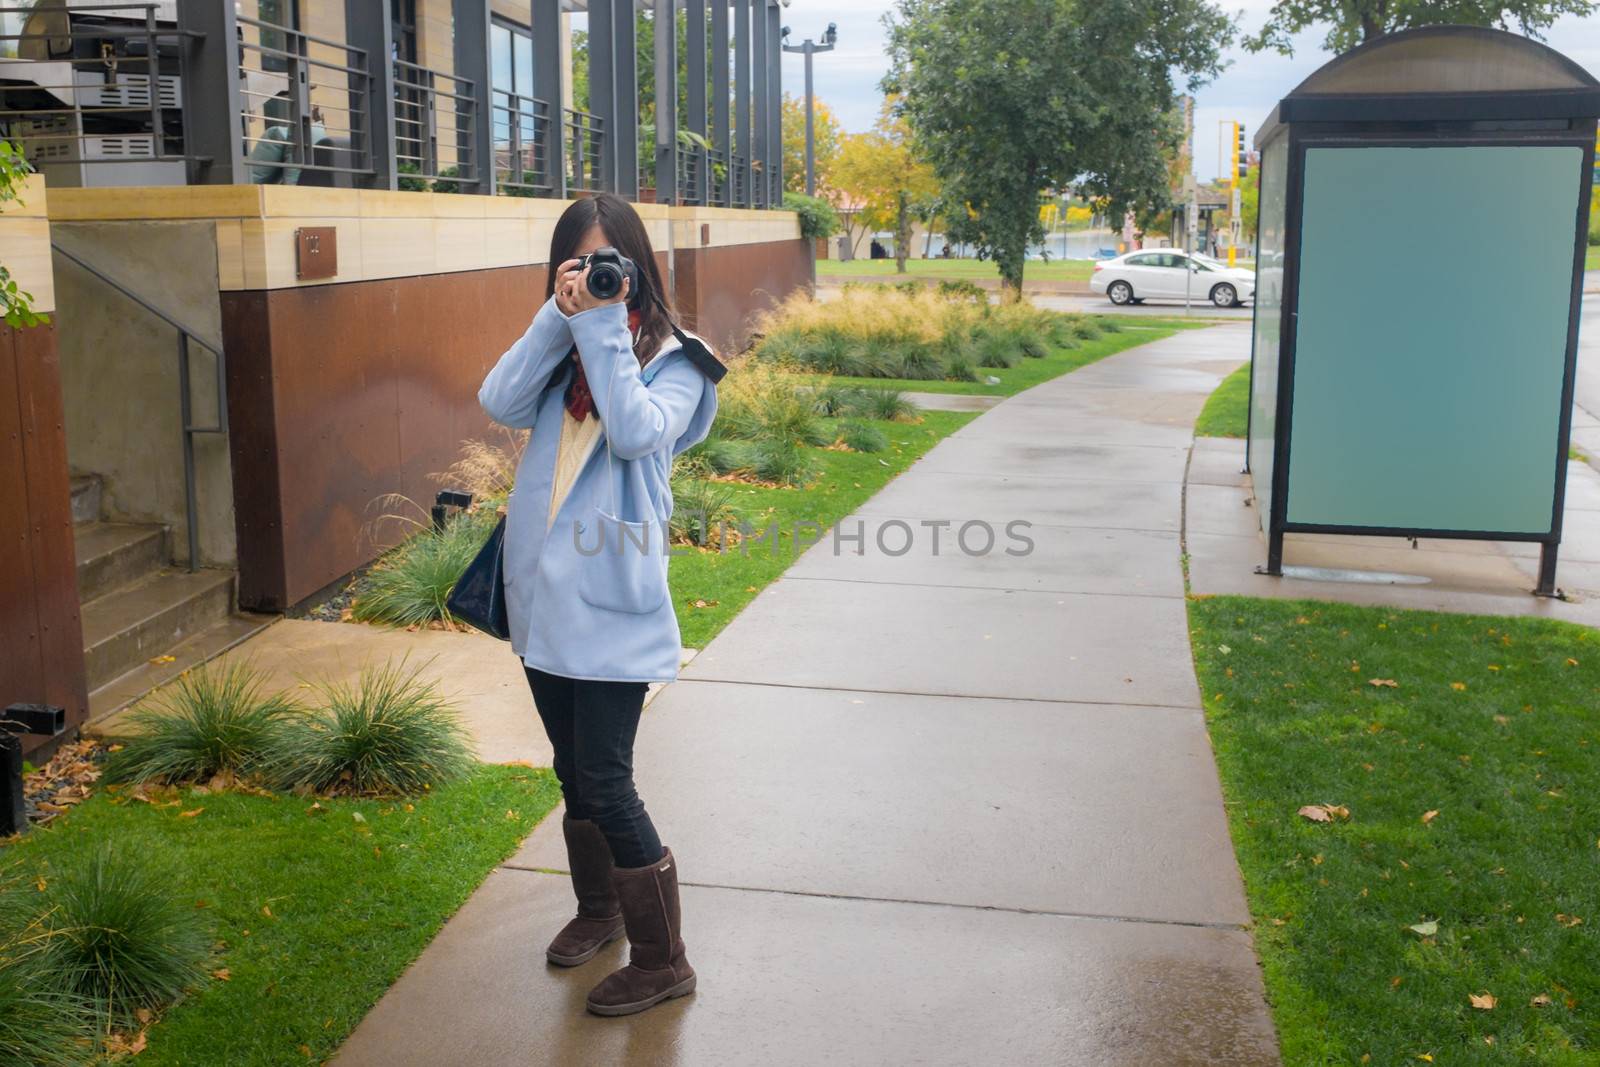 Girl photographer with camera on a public side walk during autumn listening to music